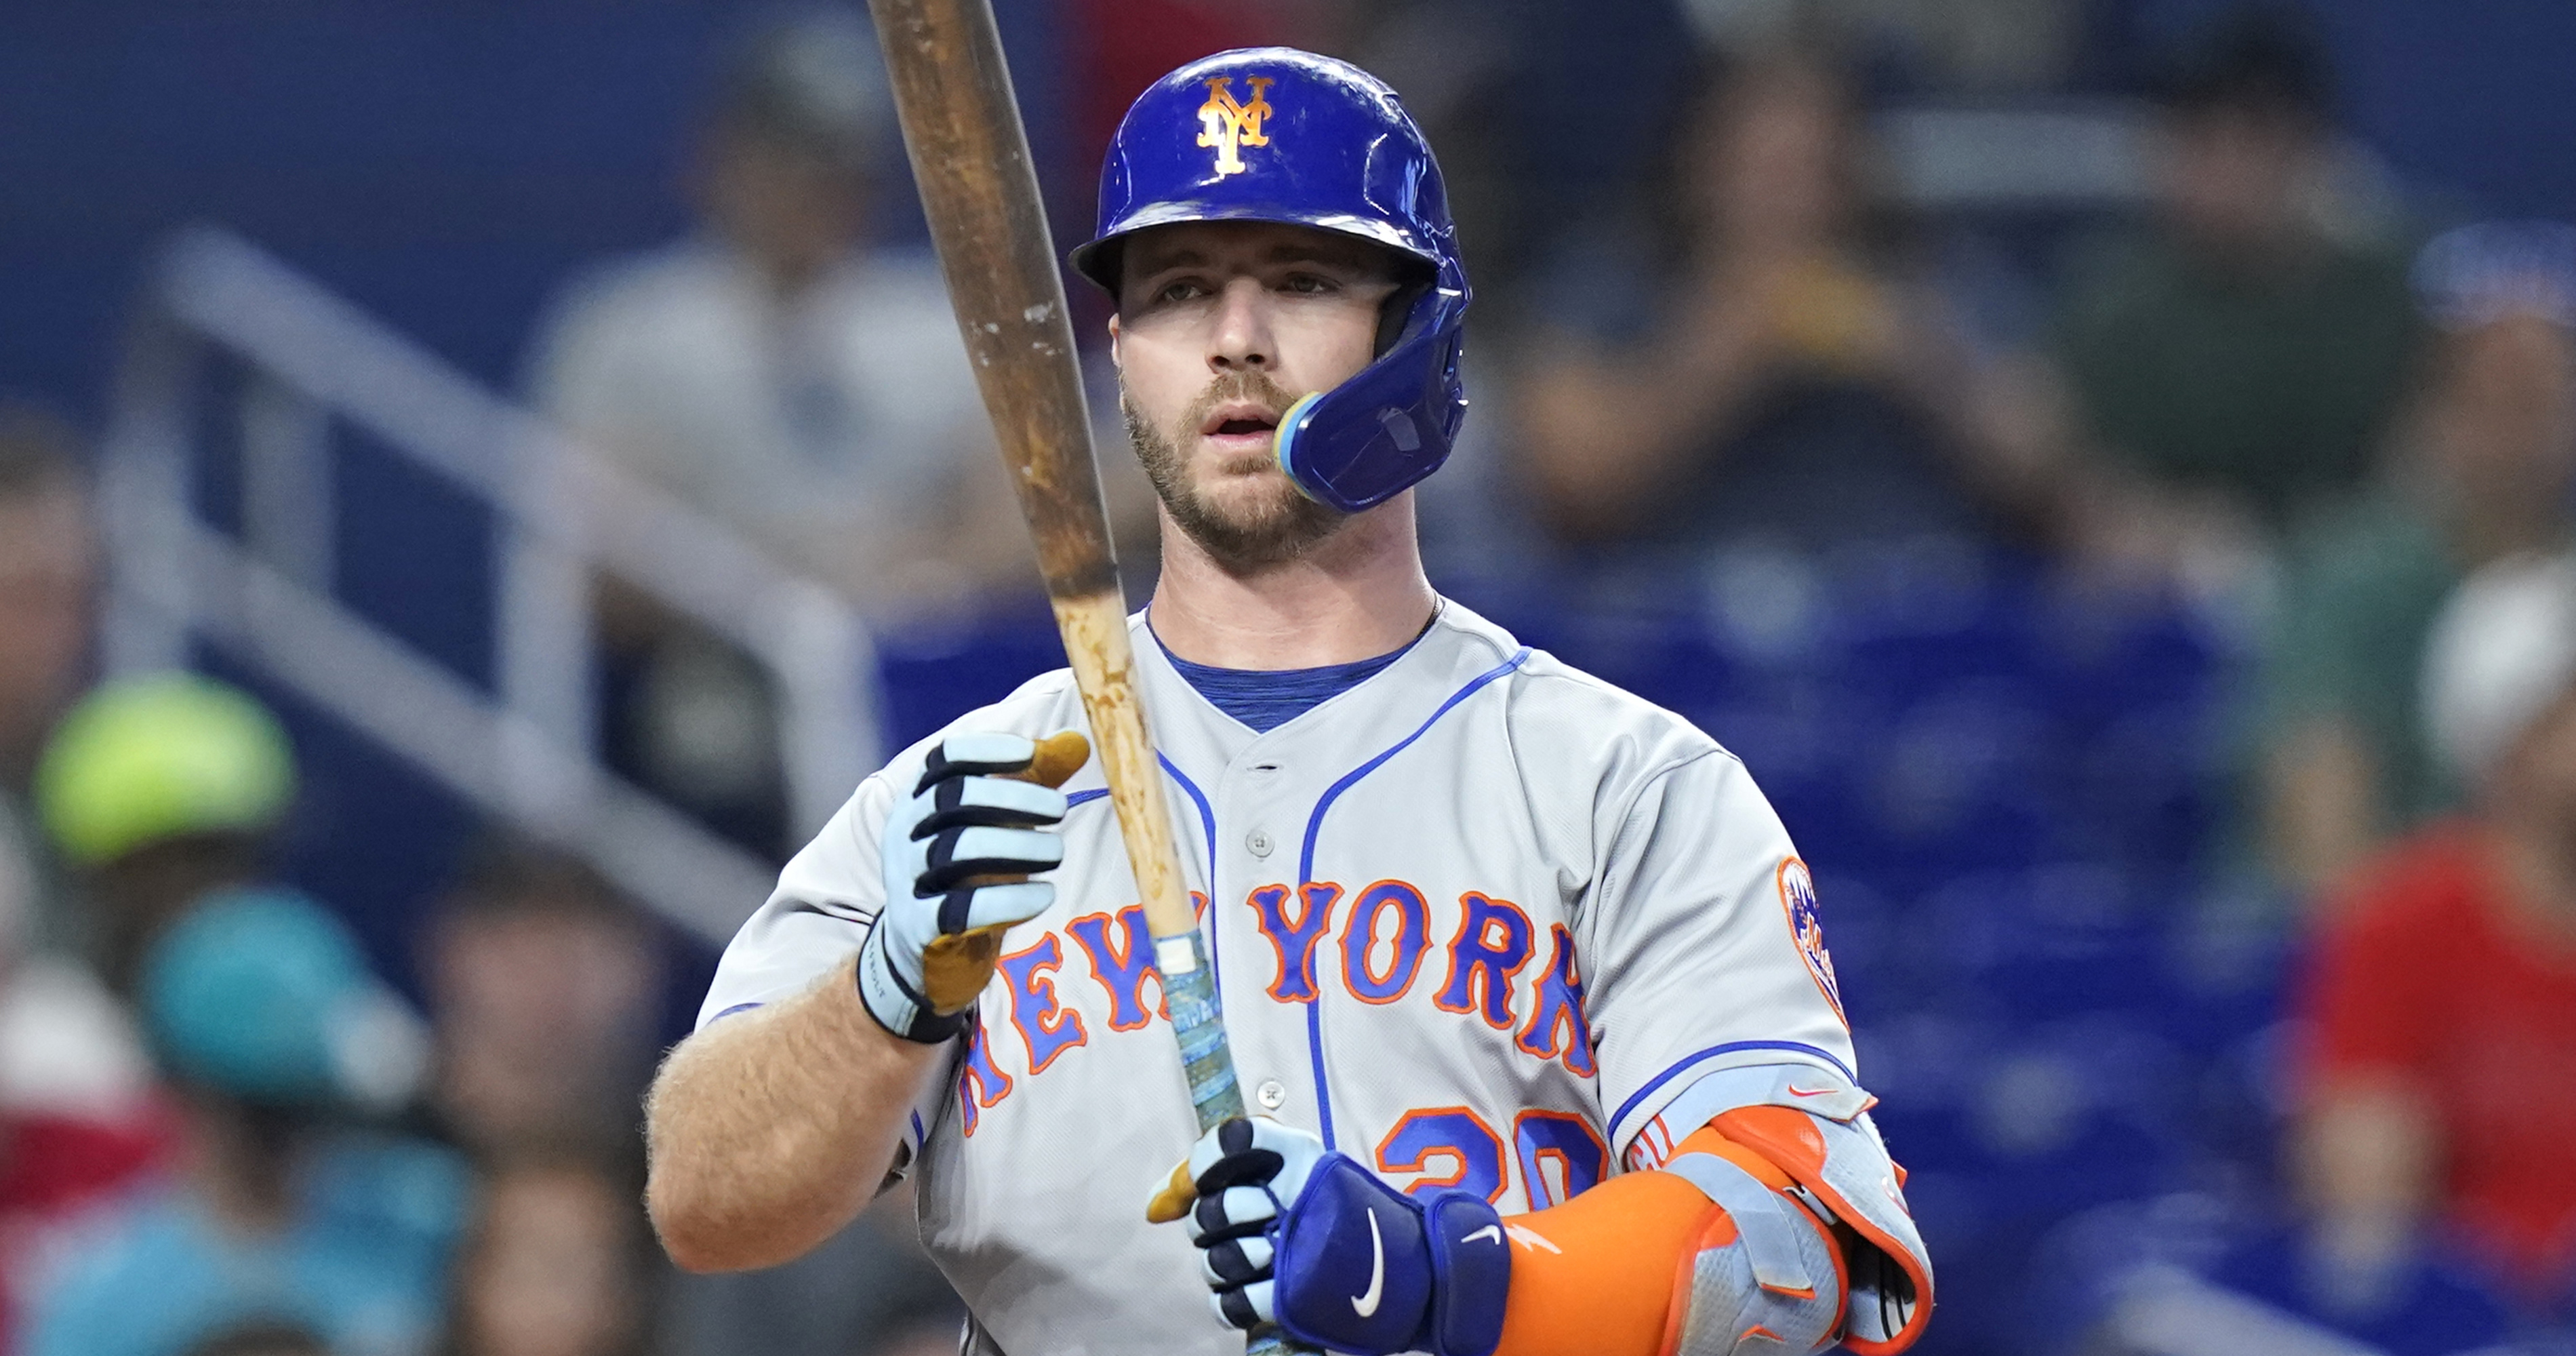 How Pete Alonso overcame gruesome college injury shows his toughness